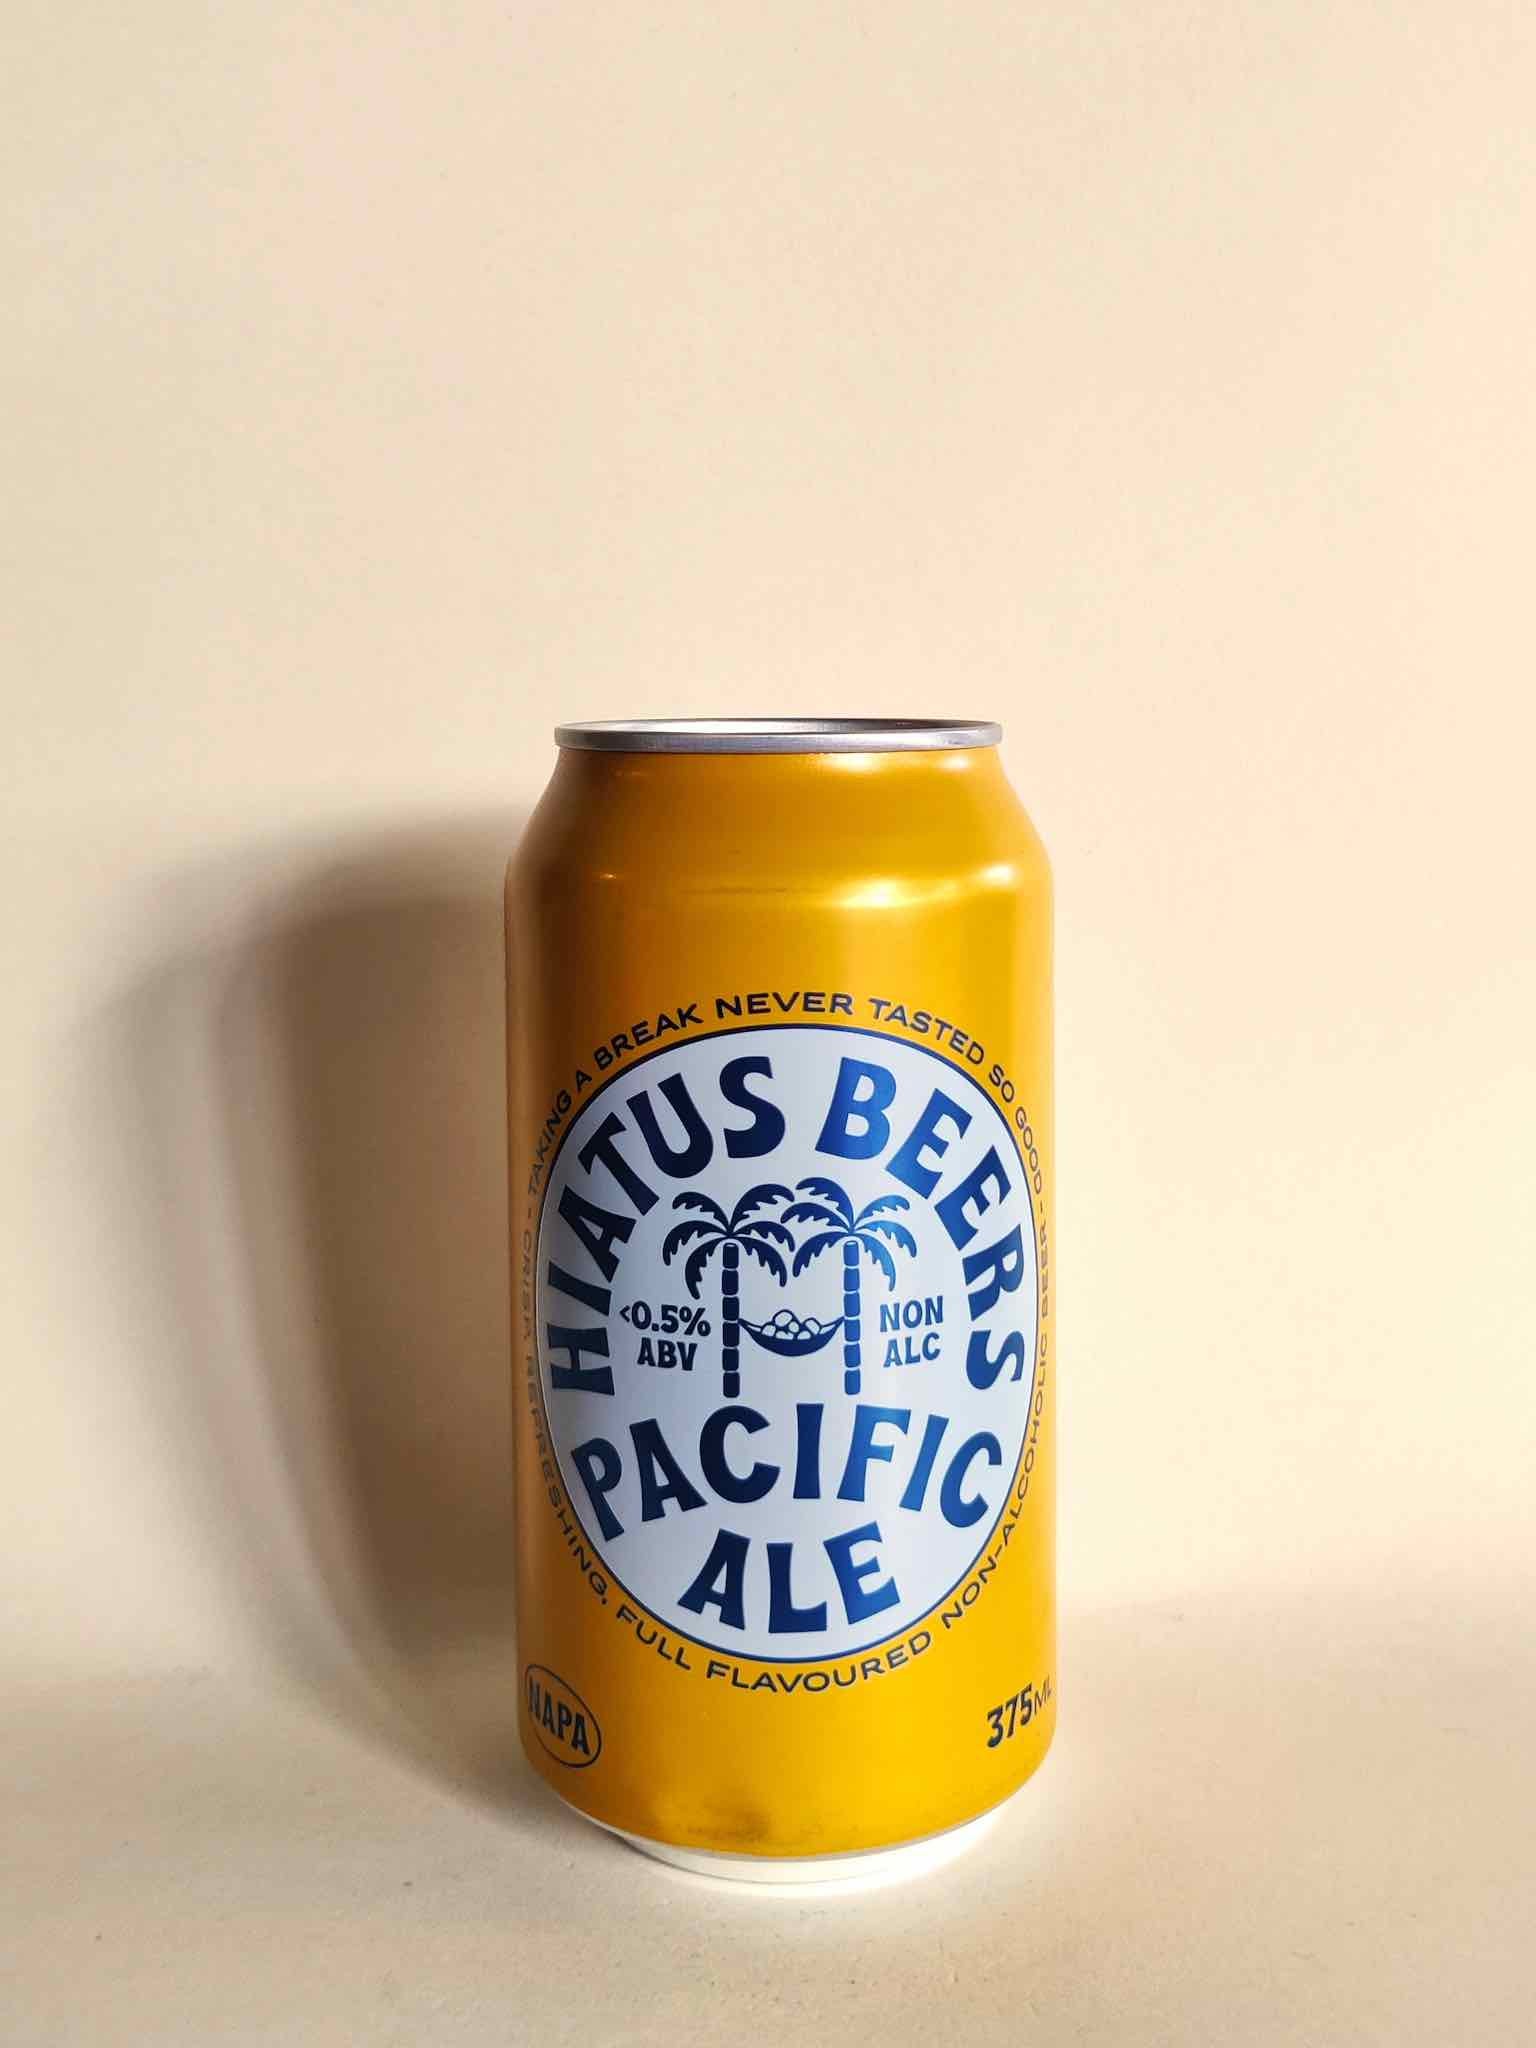 A 375ml can of Hiatus Beers Non-Alcoholic Pacific Ale.